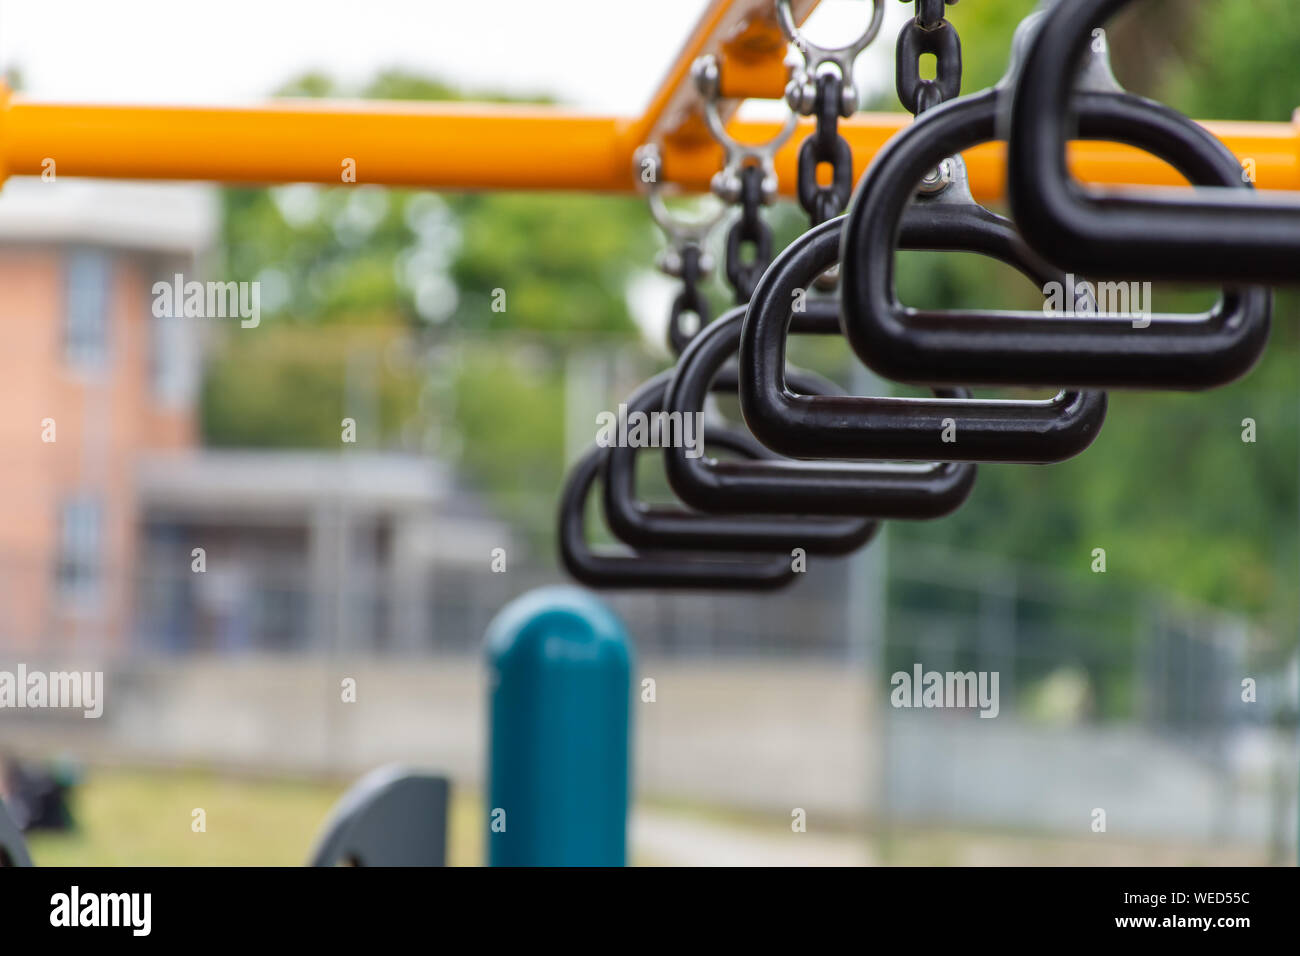 Empty monkey bars at a playground concept looking through at goals and holding on strong preventing falling and maintaining balance. Stock Photo